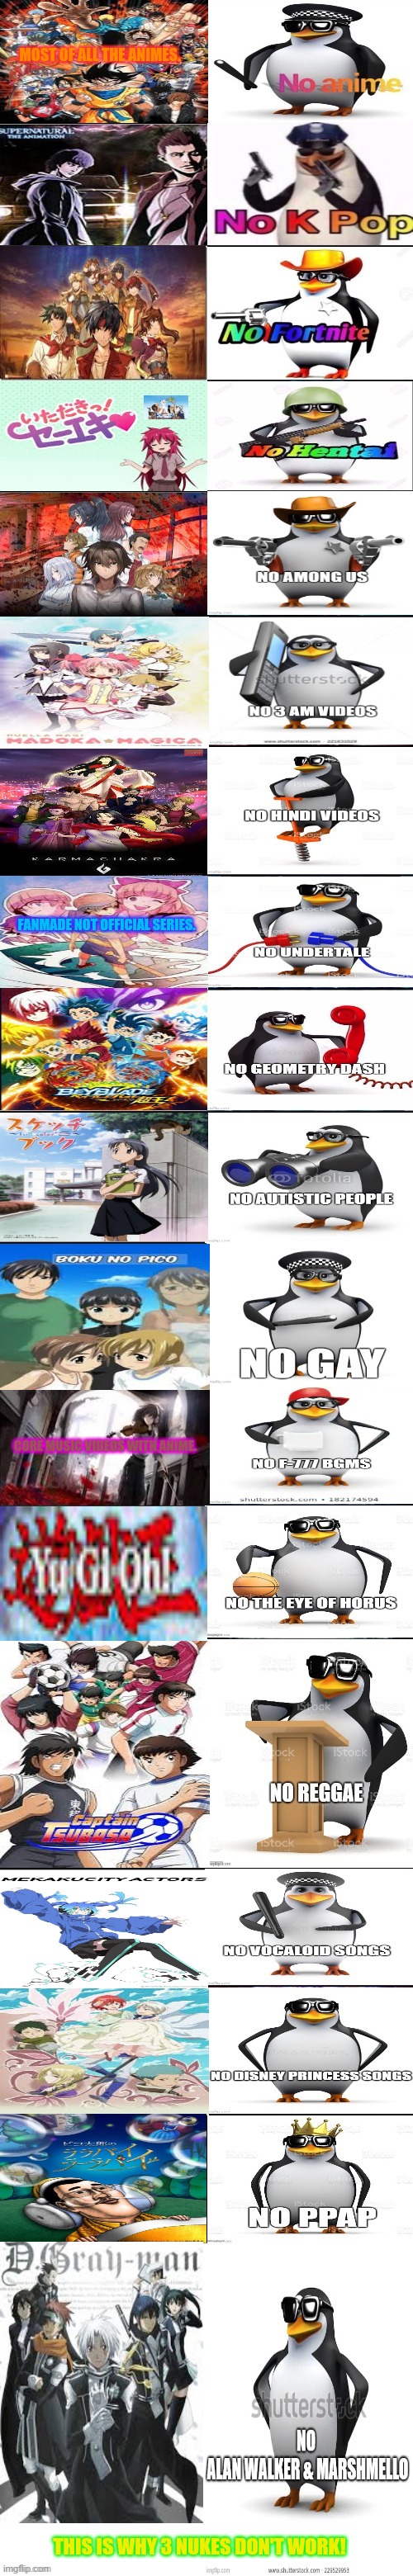 NO anime penguin expaning | MOST OF ALL THE ANIMES. FANMADE NOT OFFICIAL SERIES. CORE MUSIC VIDEOS WITH ANIME. THIS IS WHY 3 NUKES DON'T WORK! | image tagged in memes,anime is not cartoon,wrong | made w/ Imgflip meme maker